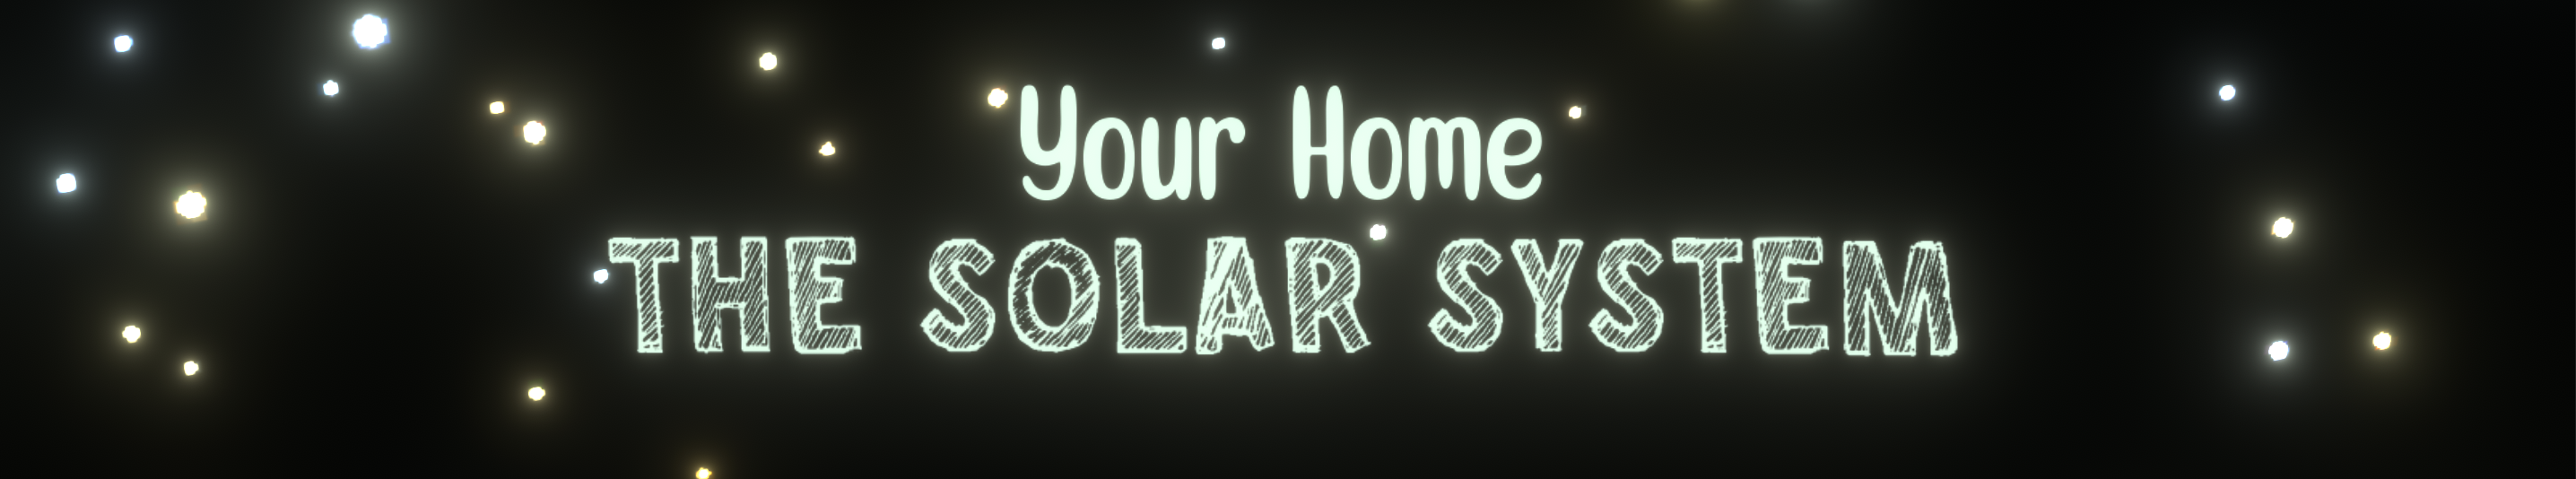 Your Home: THE SOLAR SYSTEM